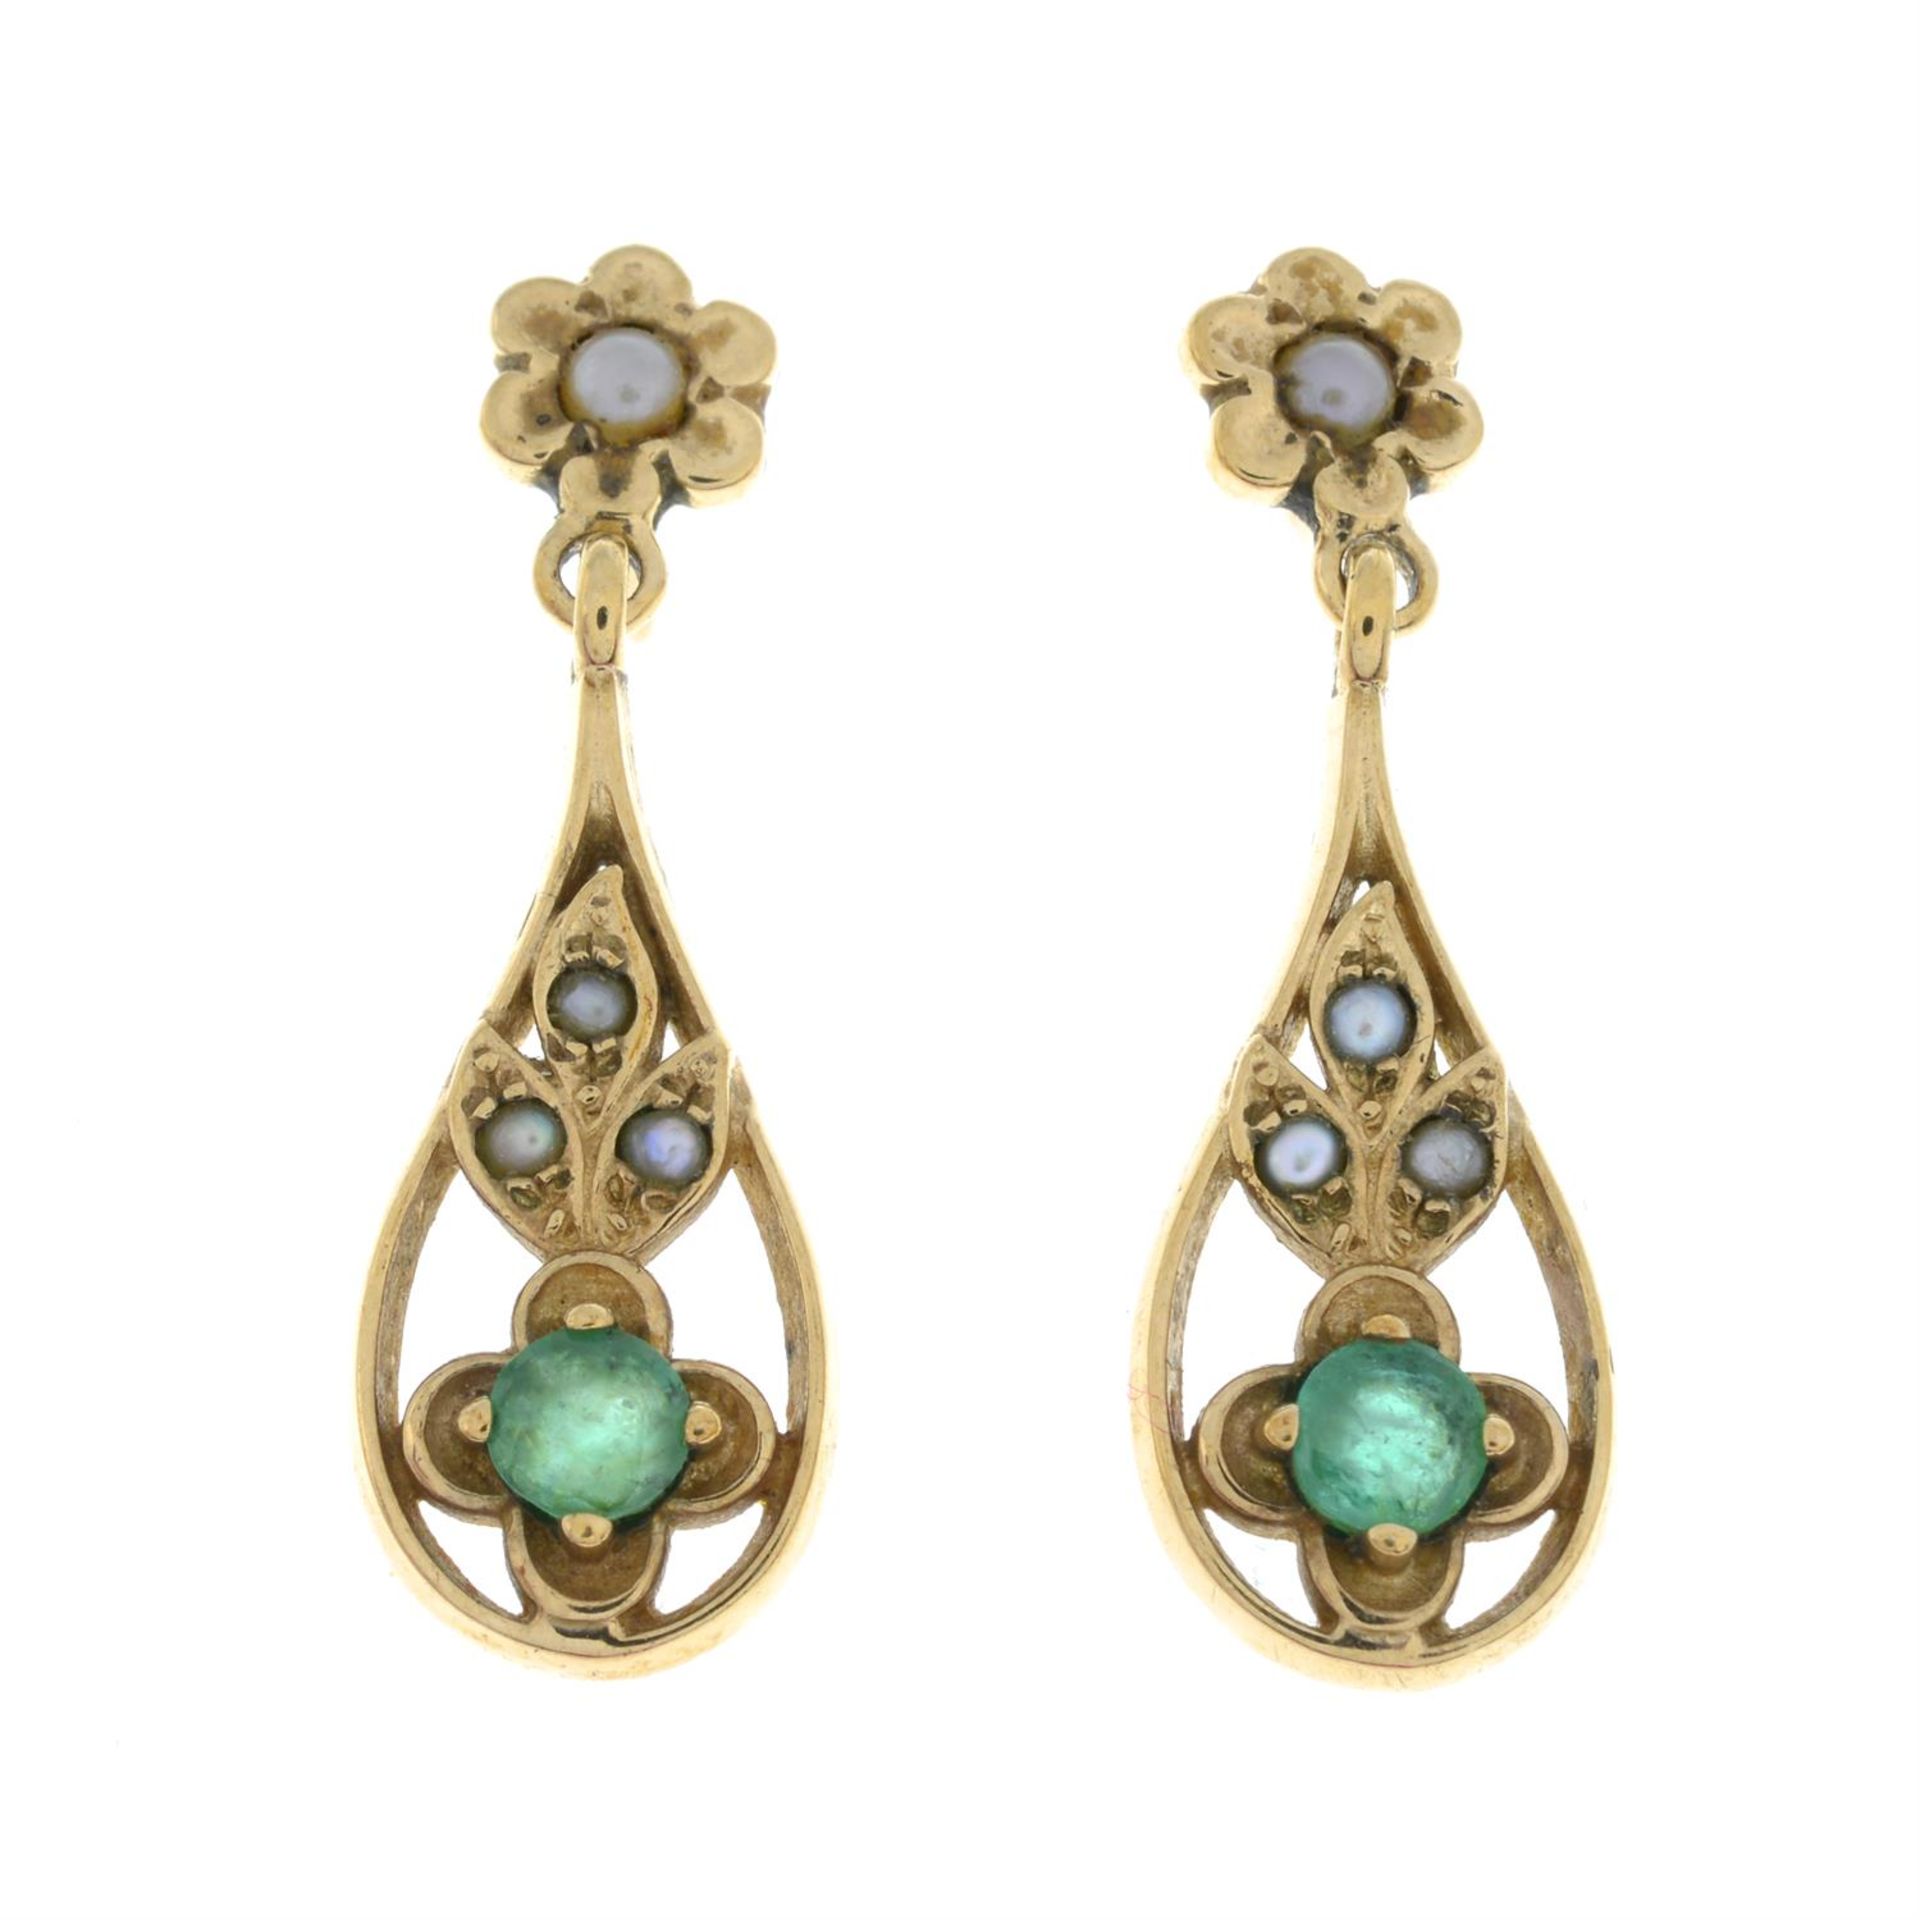 A pair of 9ct gold emerald and split pearl drop earrings.